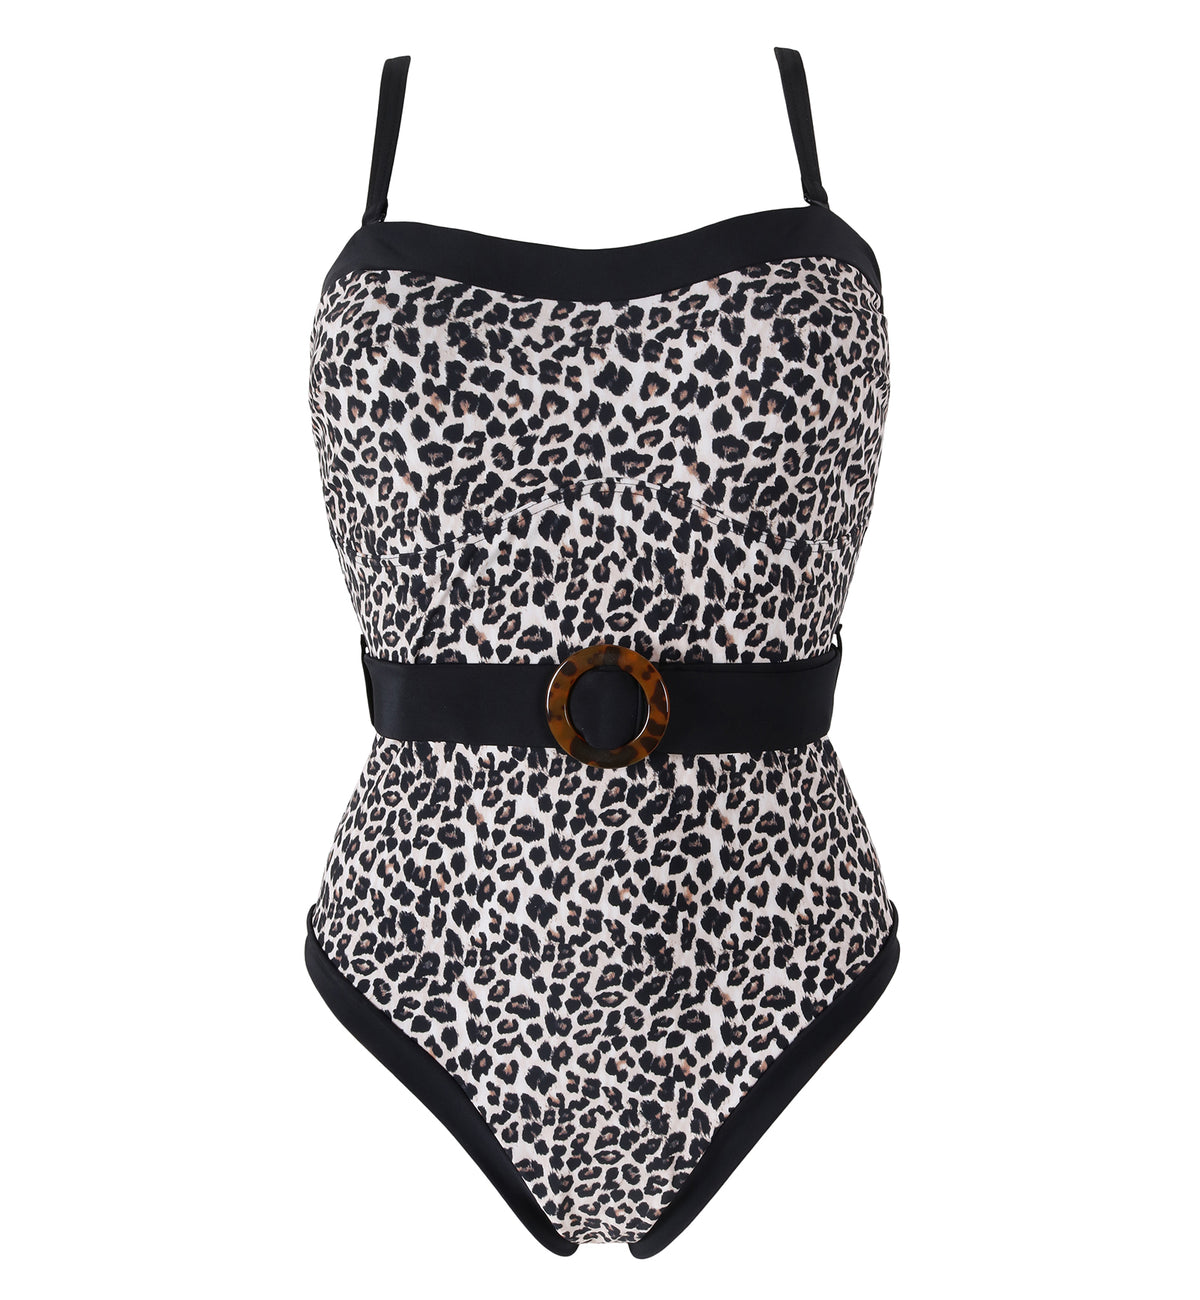 Pour Moi Removable Straps Belted Control Swimsuit (PM1414),Small,Leopard - Leopard,Small